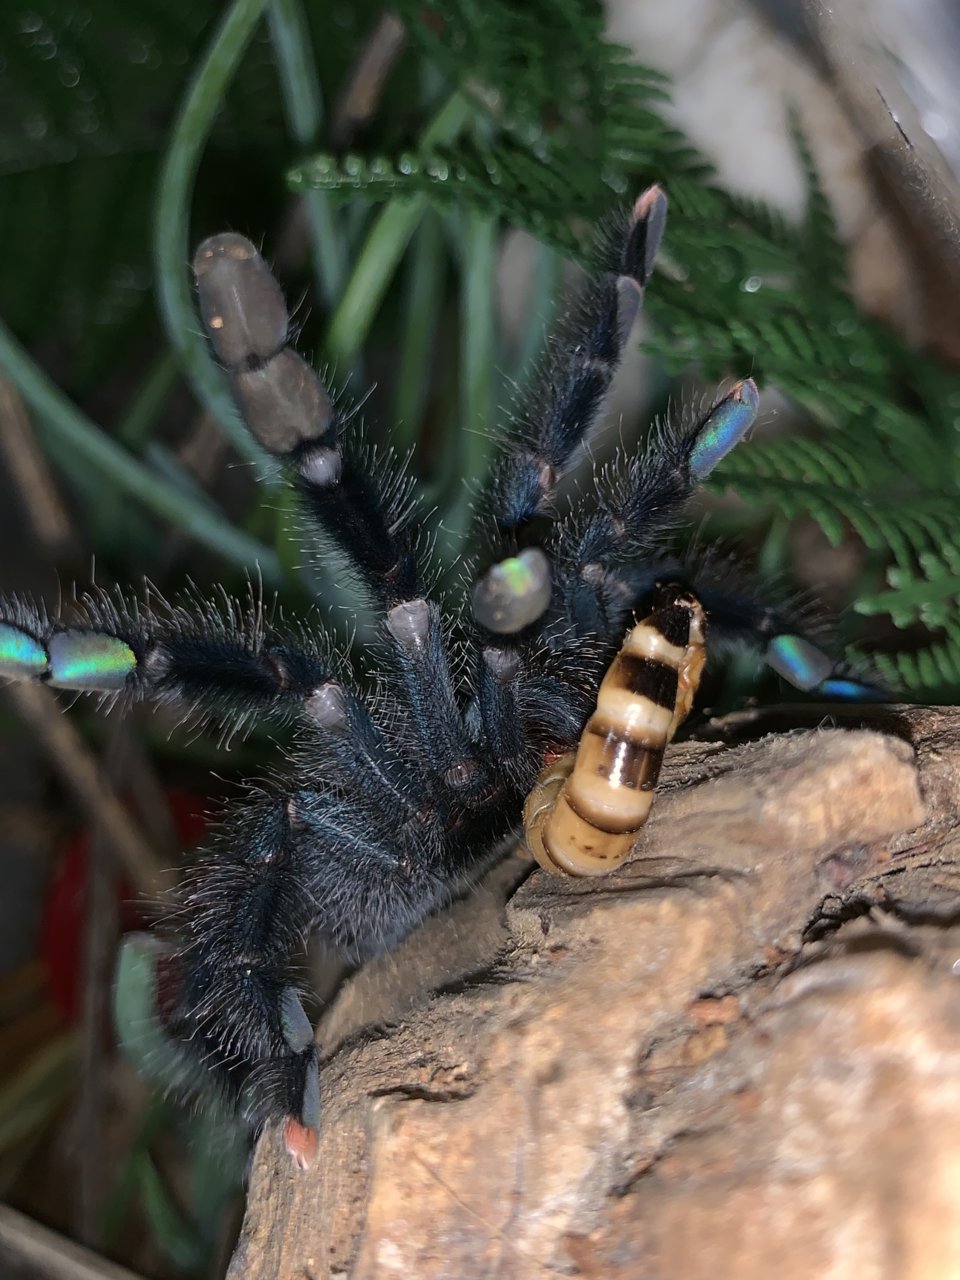 A. Avicularia ‘Smurf’ threat posture at her dinner.